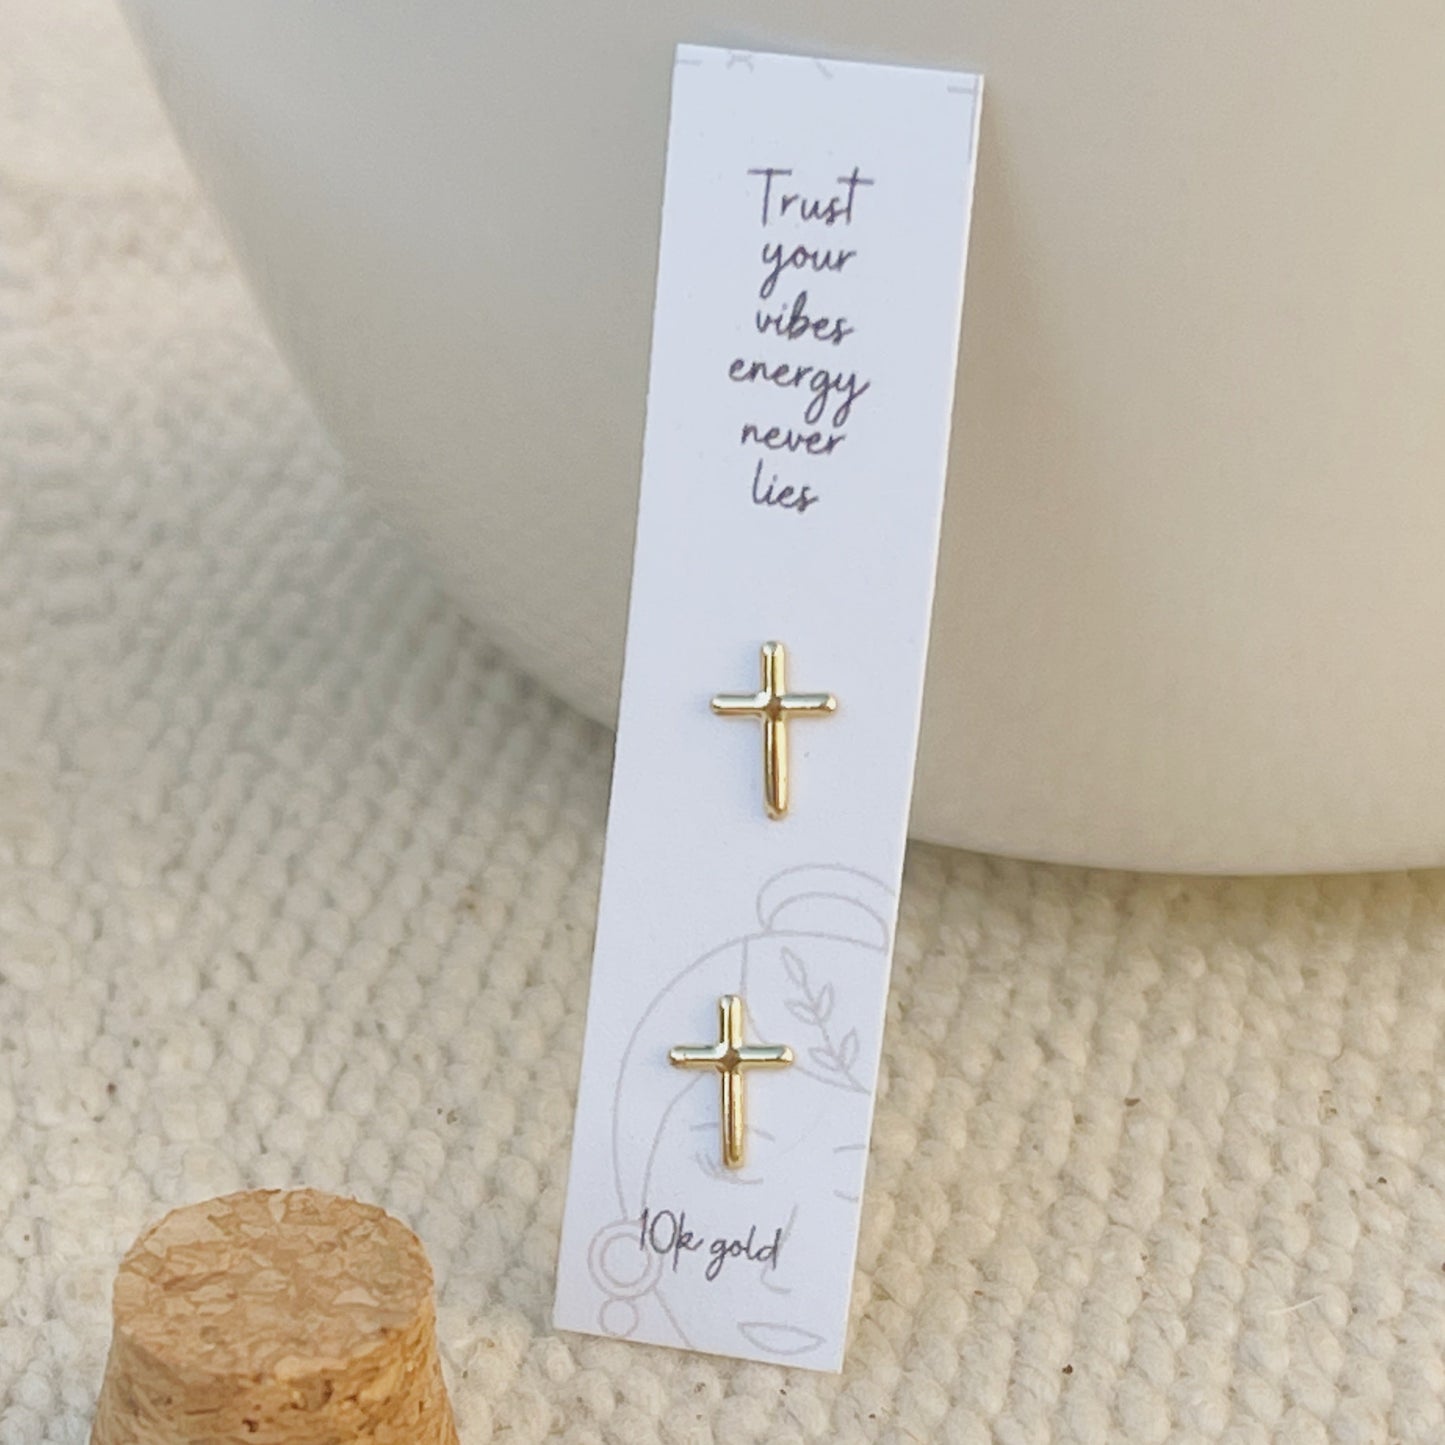 These dainty cross earrings are the perfect accent for any outfit! They are beautifully crafted with a vintage feel and made from solid gold. Wear them alone or pair them with other studs for a dazzling look.